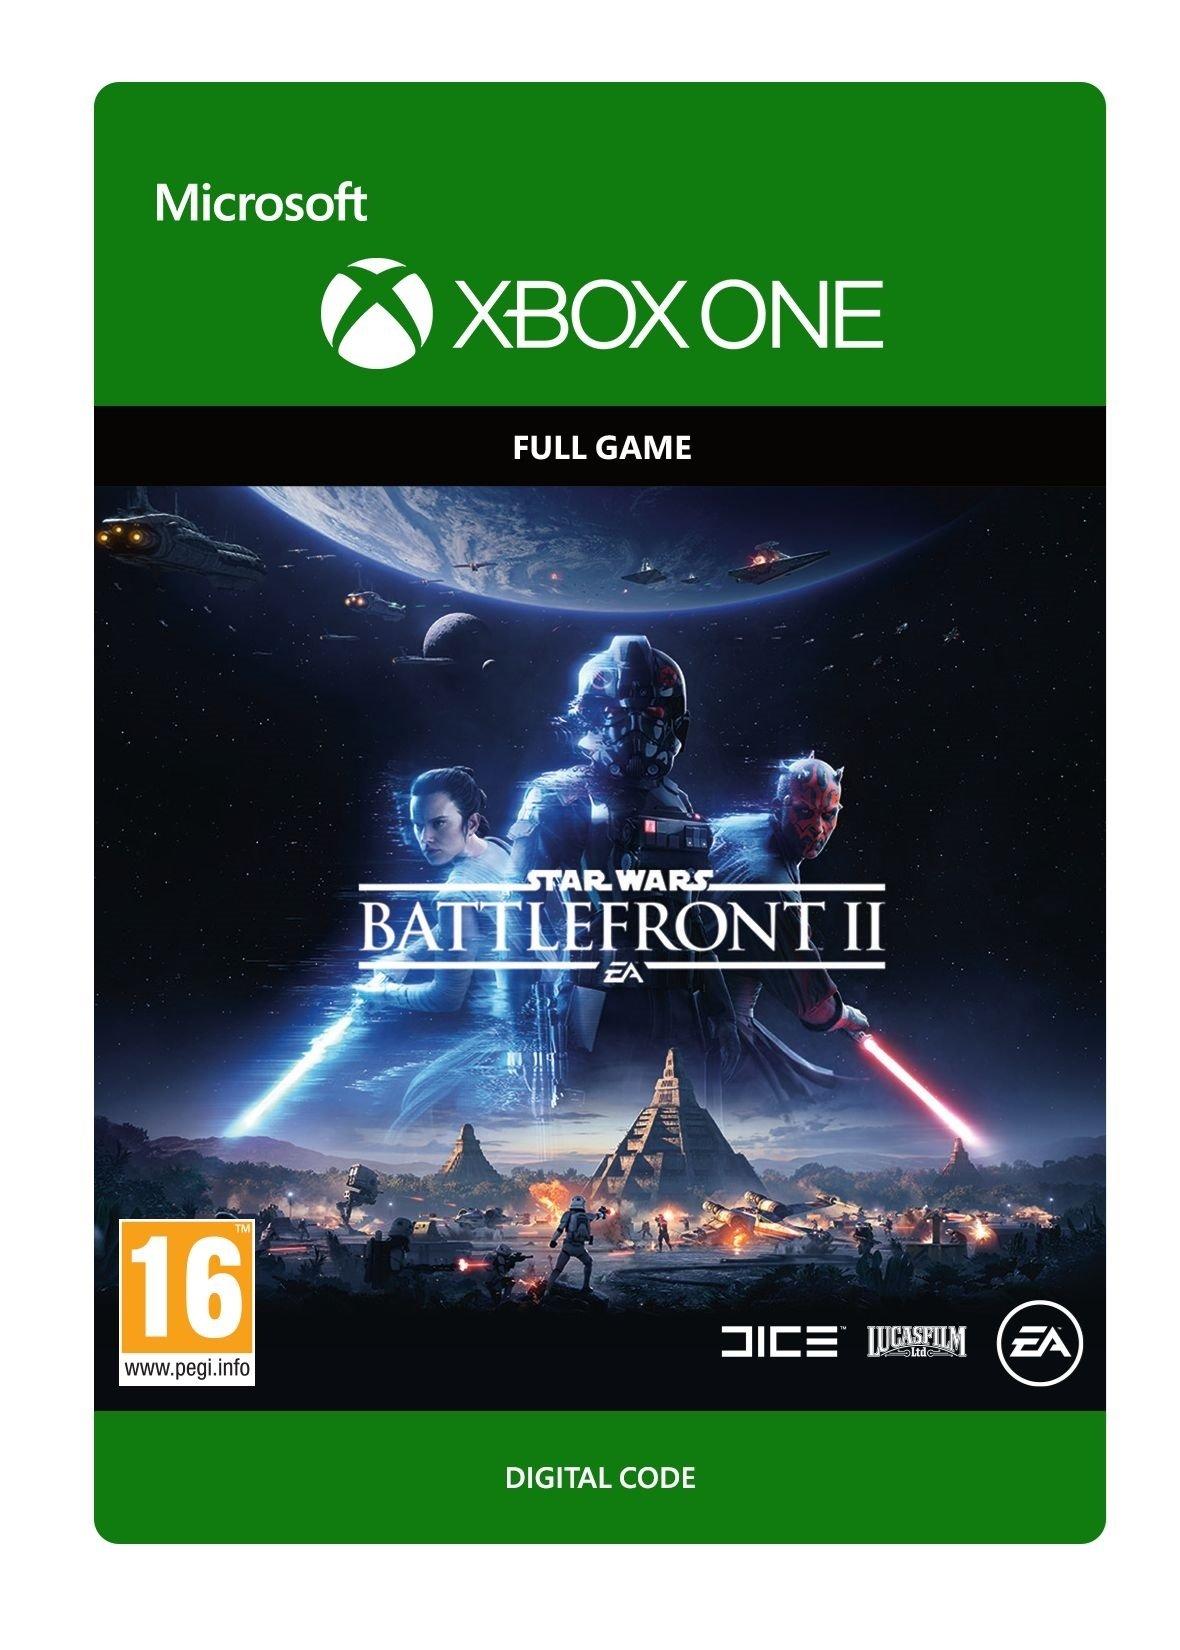 Star Wars Battlefront II: Standard Edition - Xbox One - Game | G3Q-00317 (854868d7-6ea5-433a-a0db-cd420e903f98)